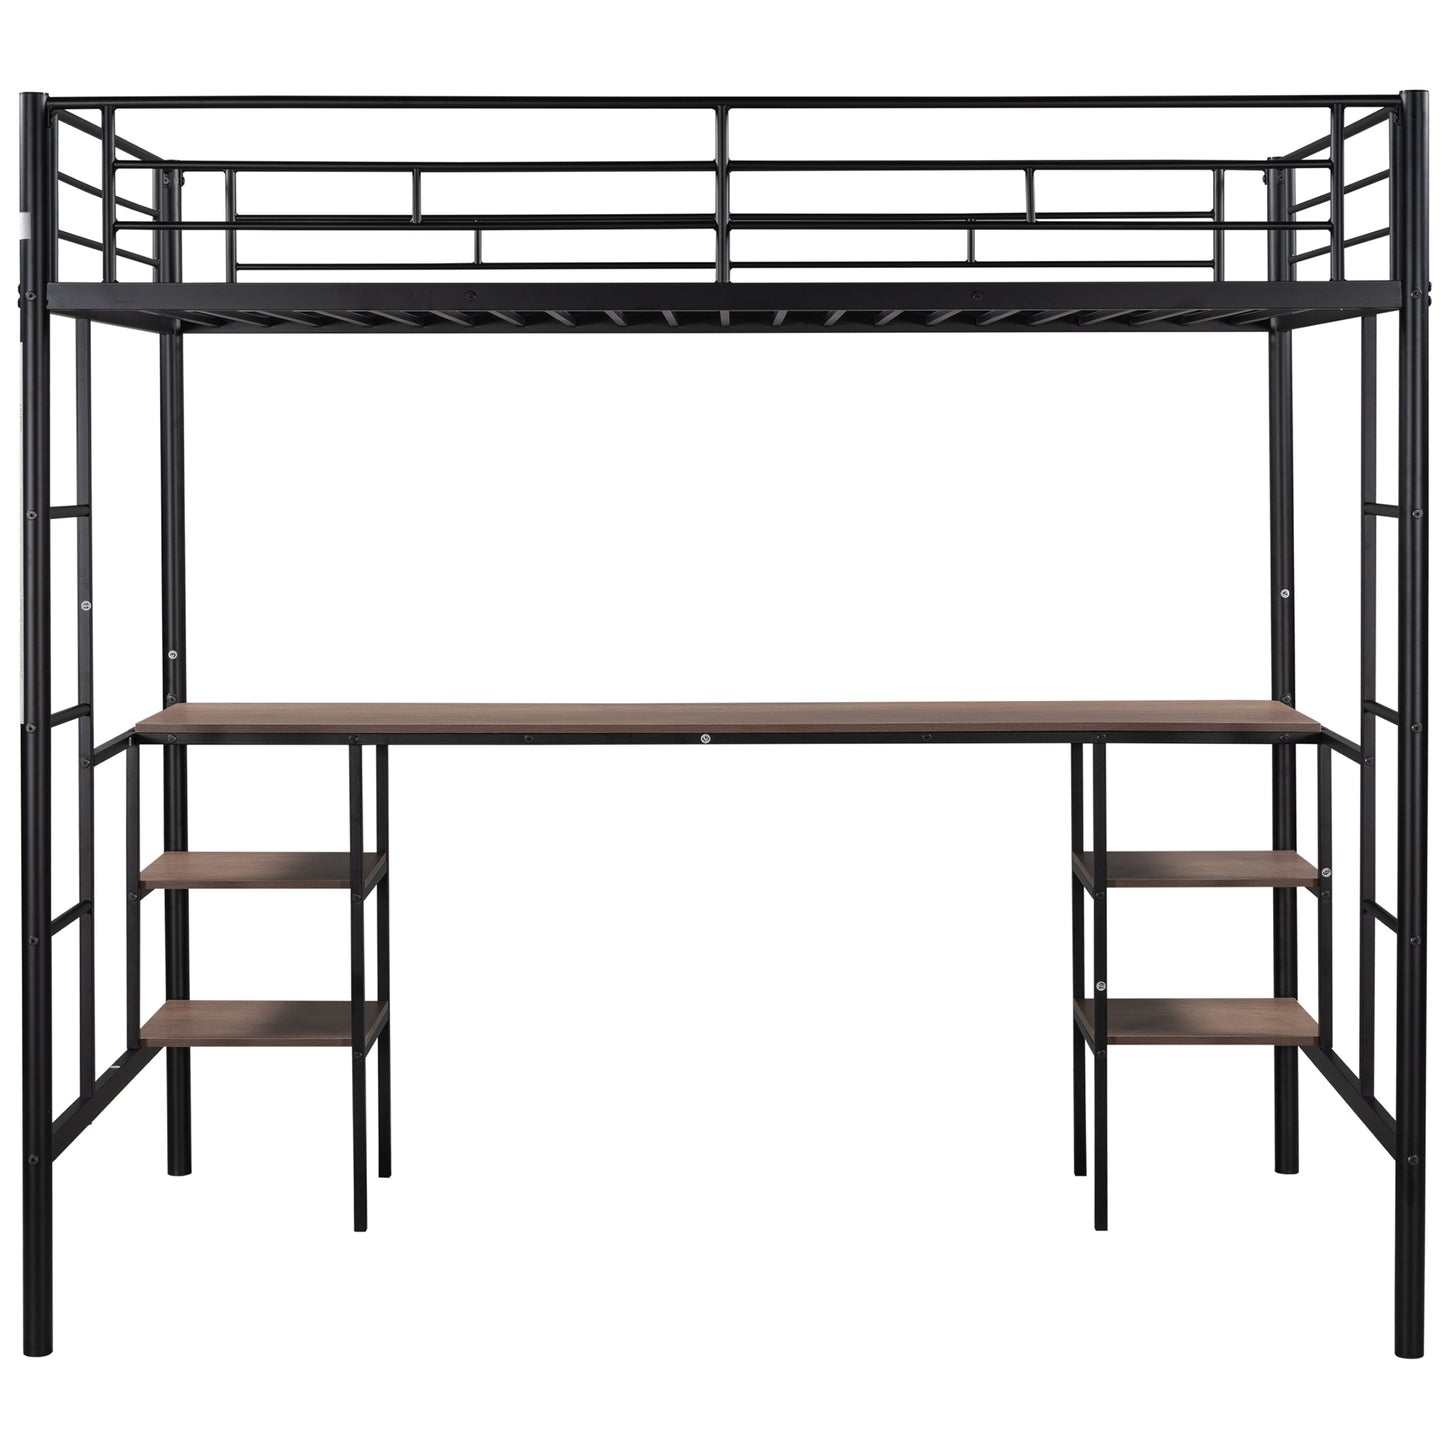 SYNGAR Metal Twin Loft Bed with Desk and Storage Shelves, Space-Saving Bed Frame with Bilateral Ladders and Safety Guard Rails for Kids Teens Adults, No Box Spring Needed